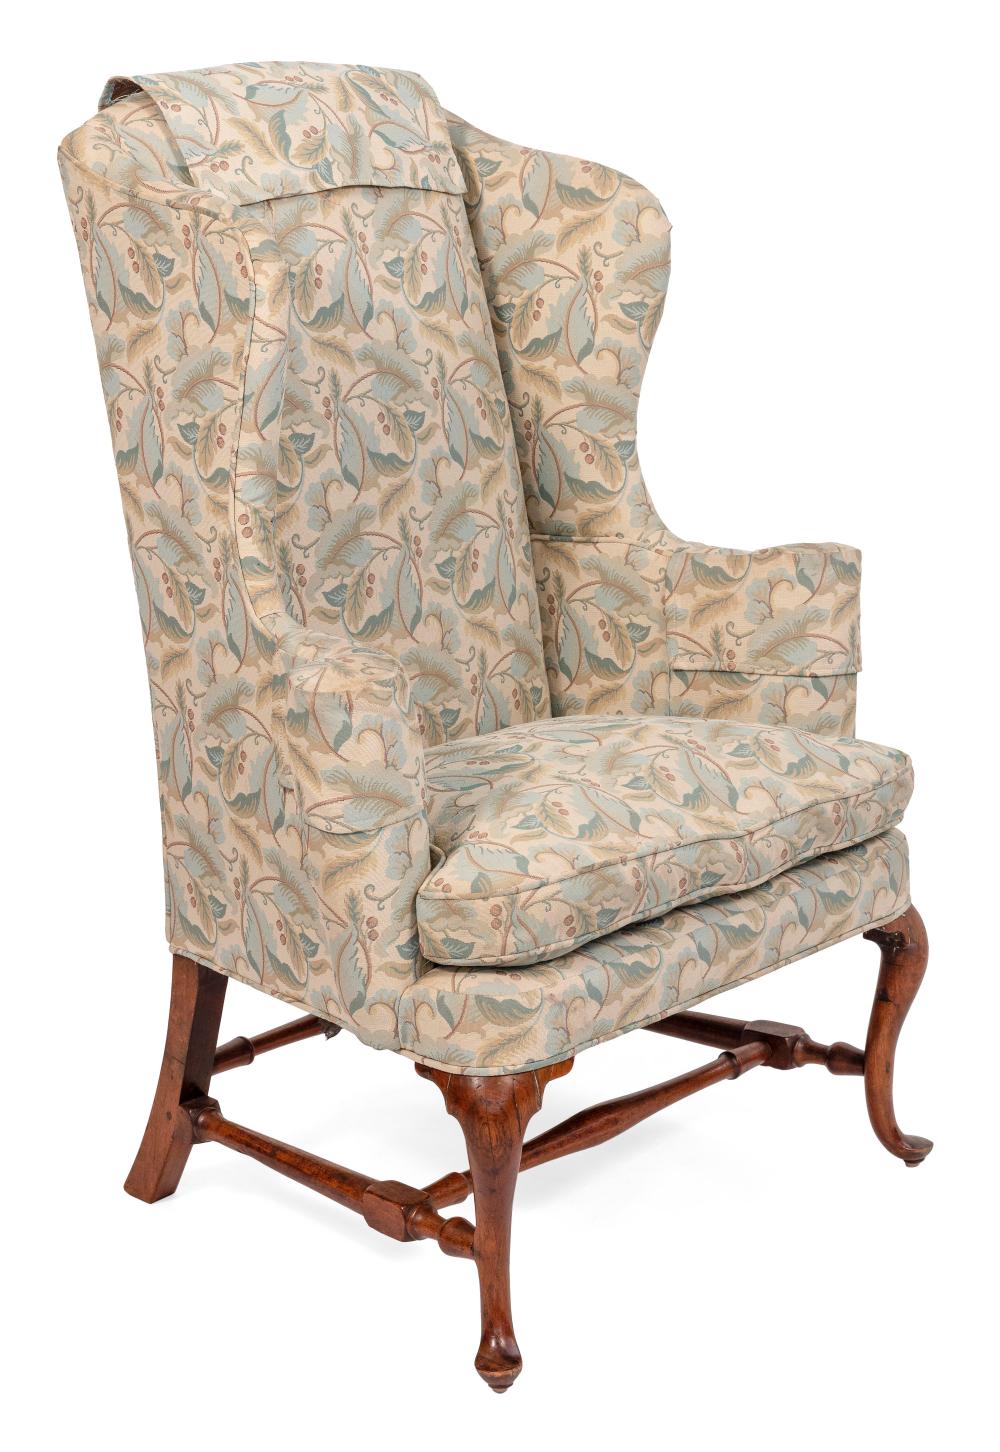 QUEEN ANNE WING CHAIR MID 18TH 35003e